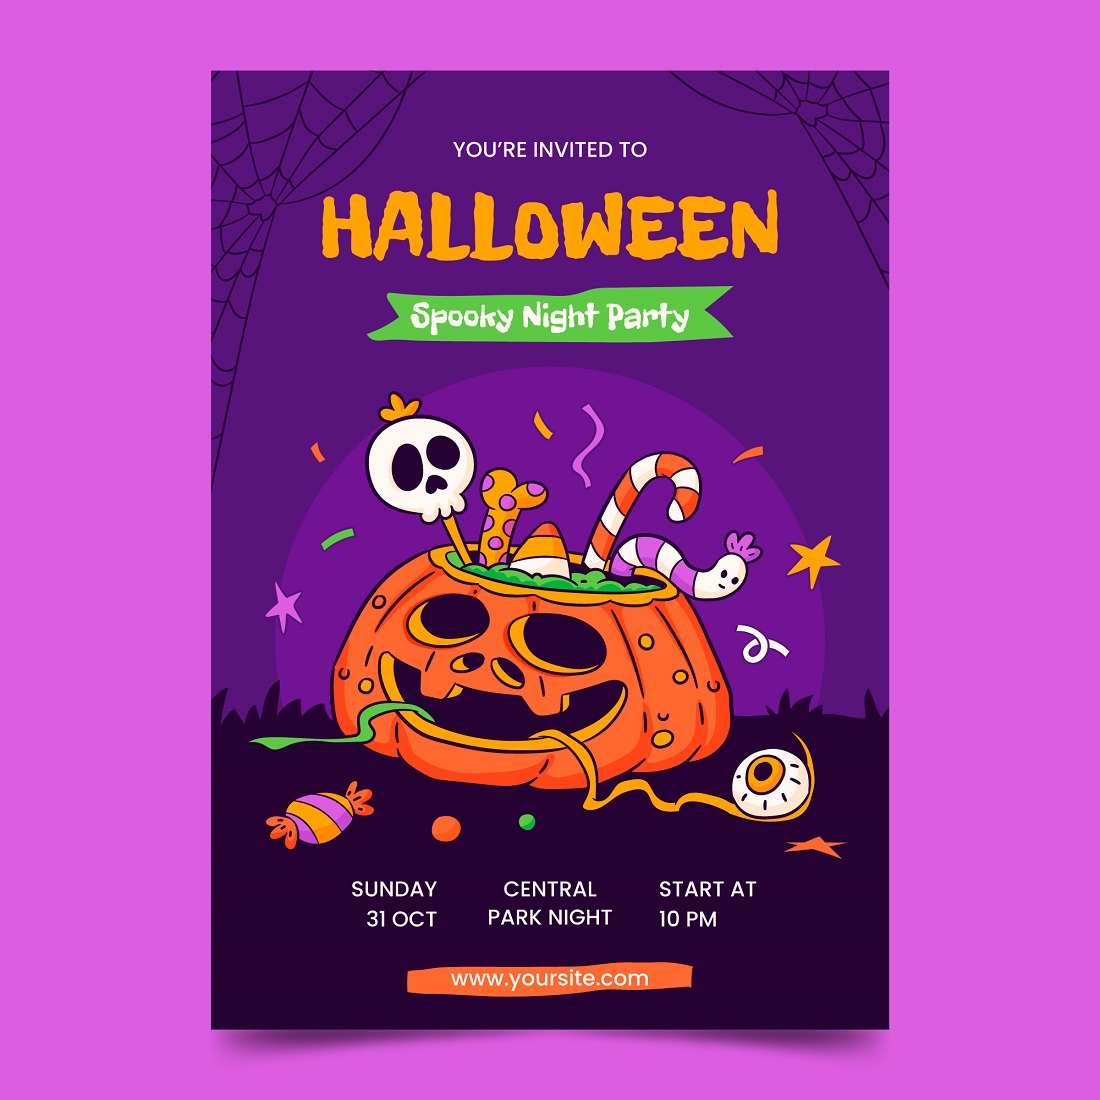 Halloween celebration preview image.